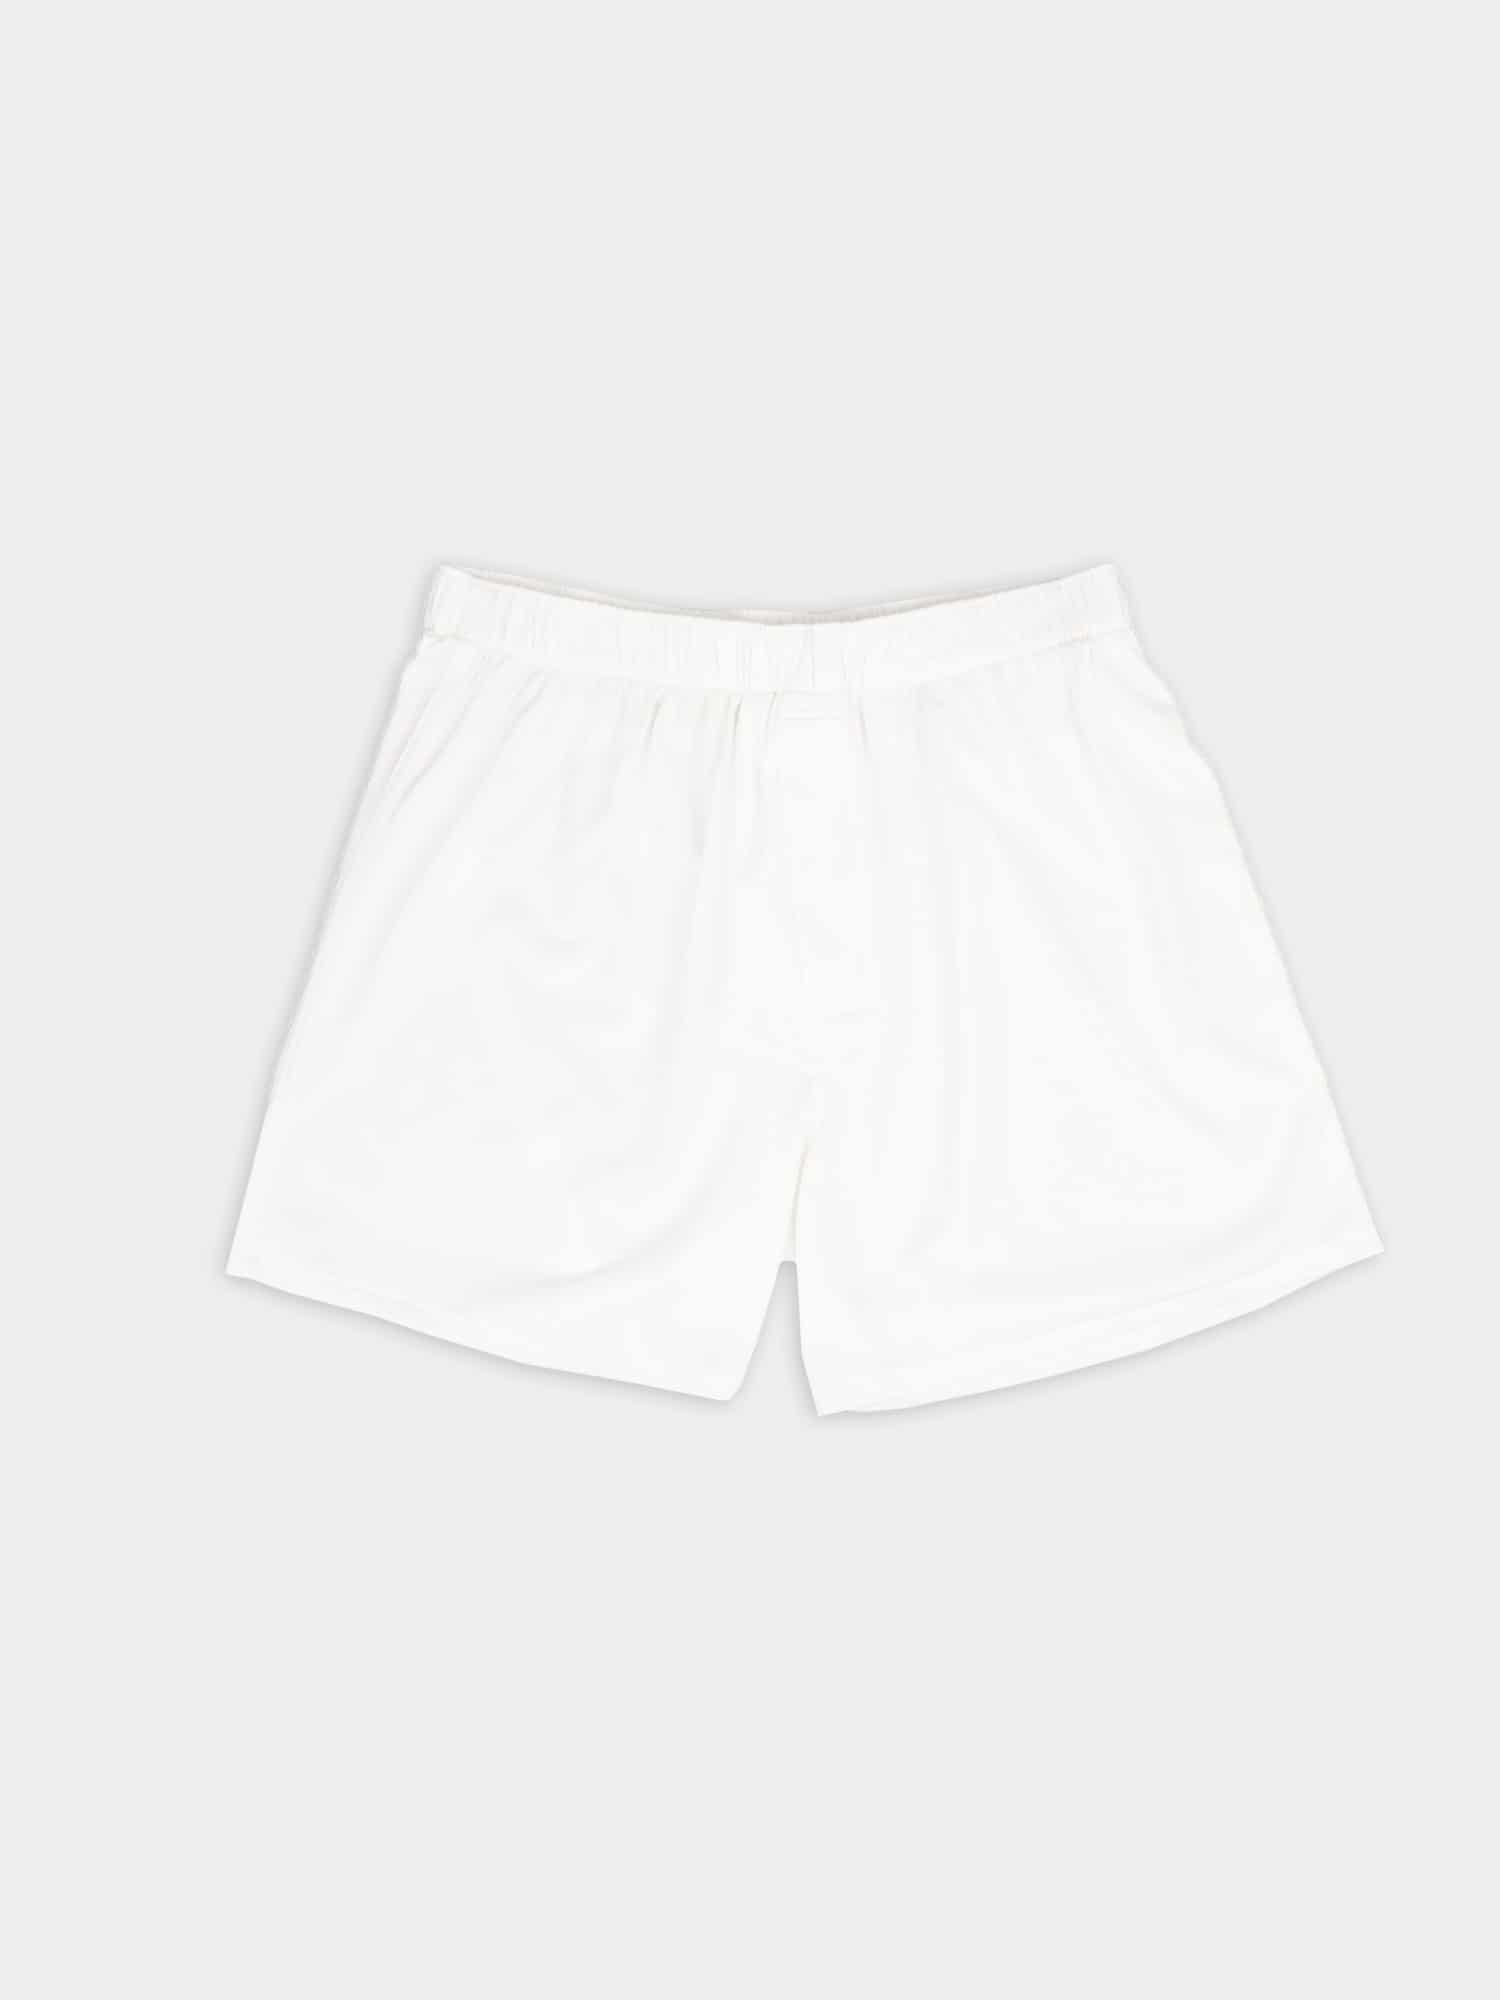 Cabourg boxer shorts White